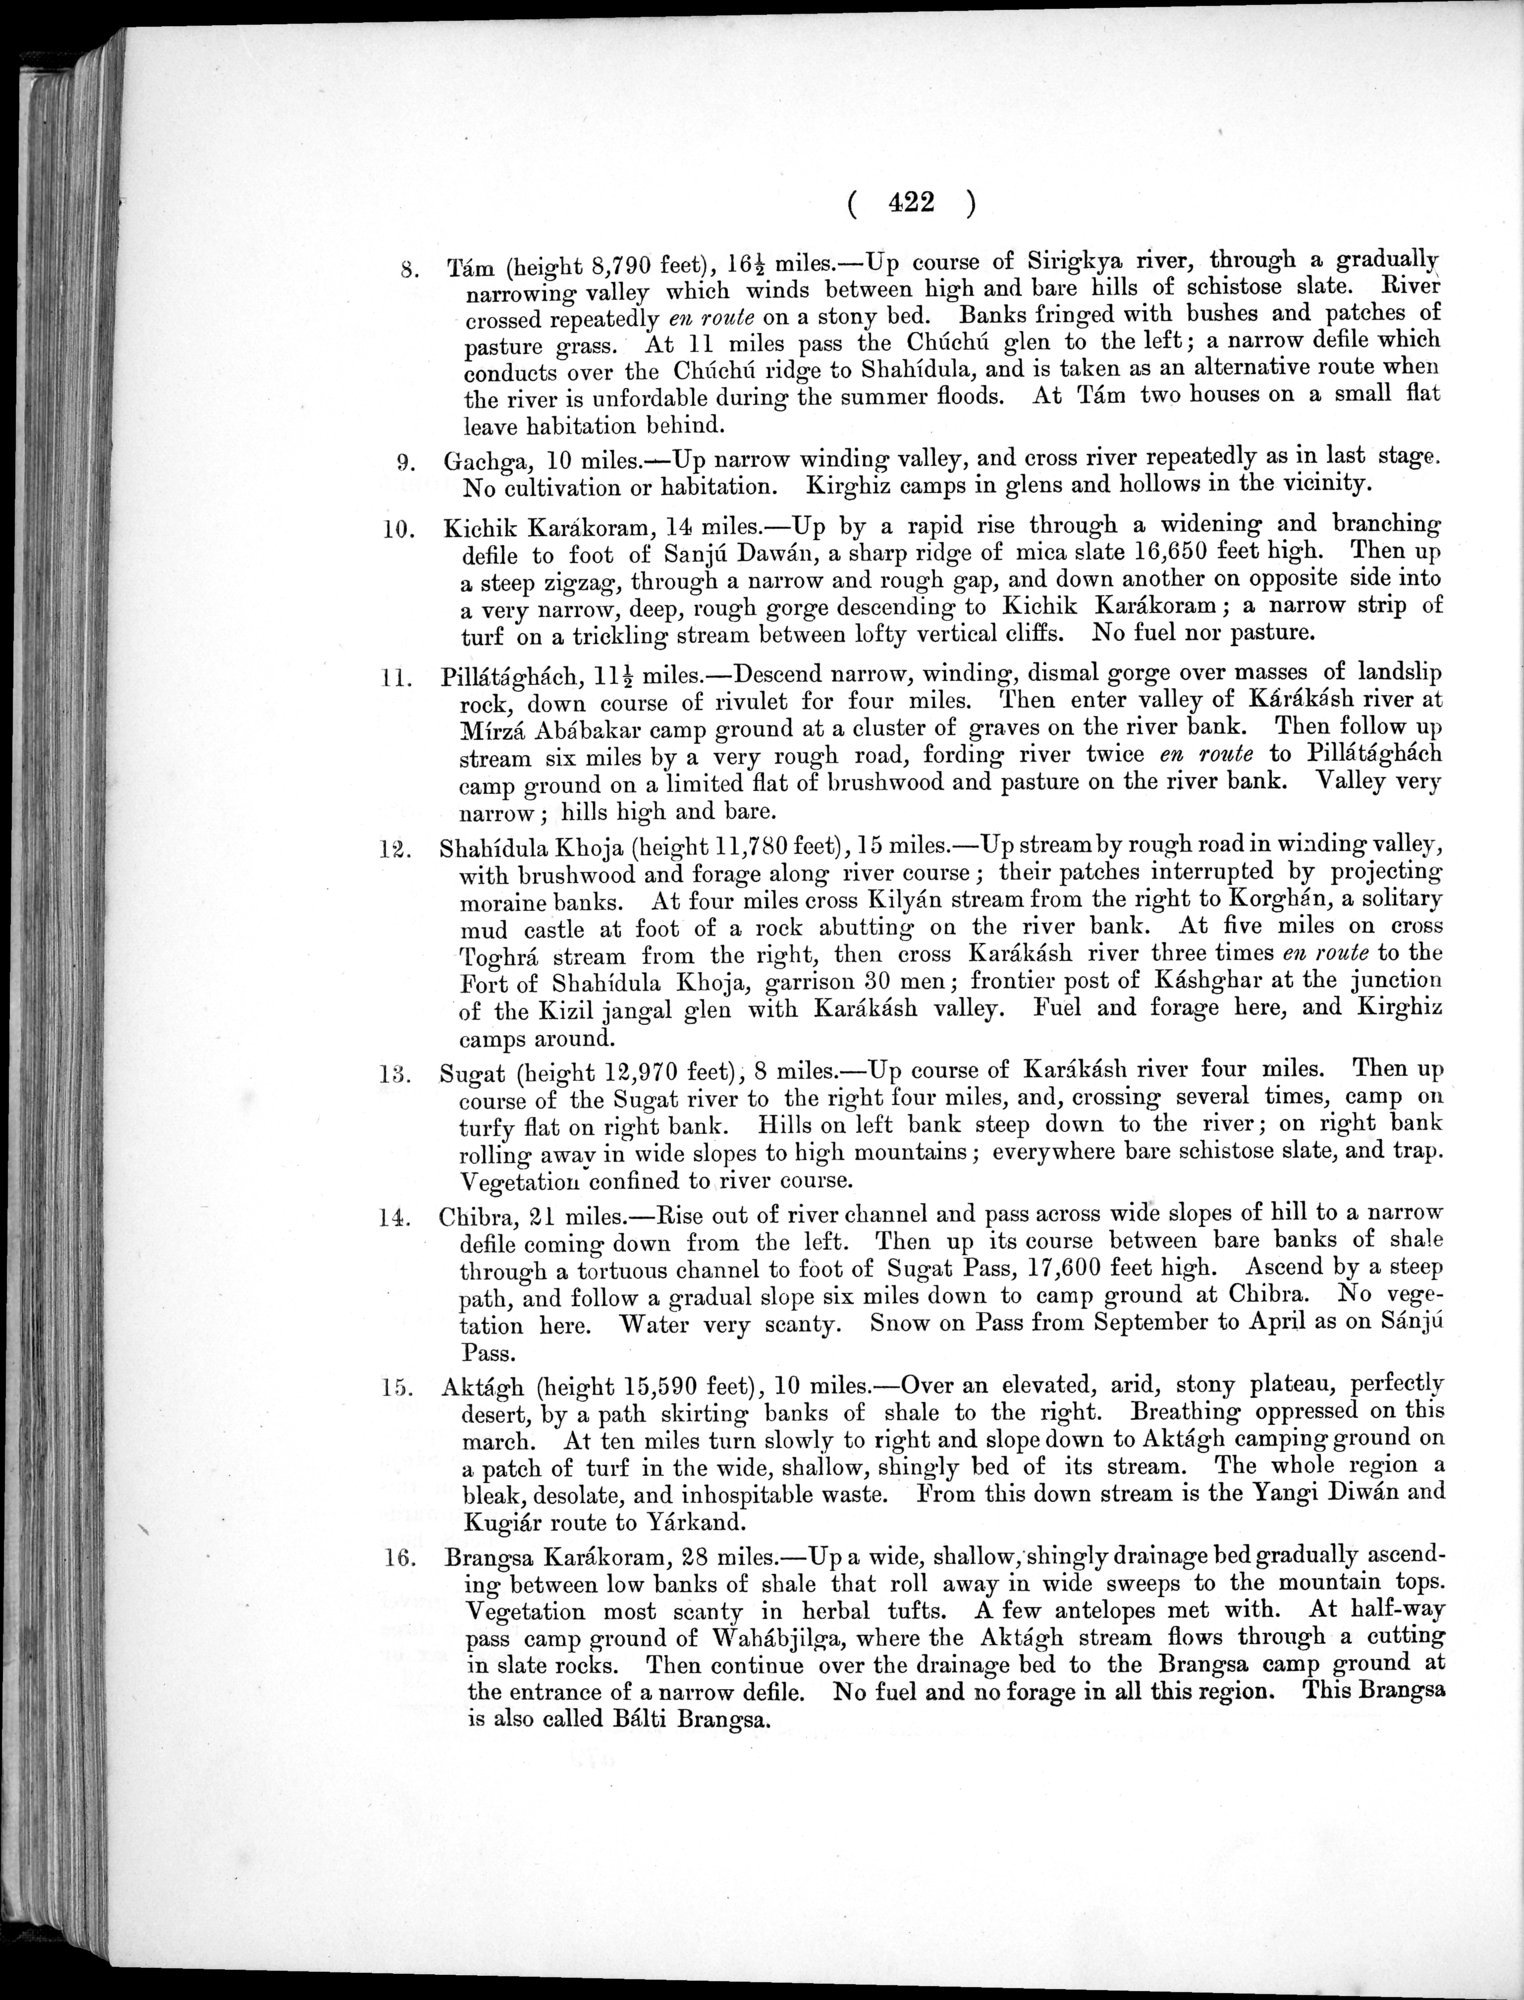 Report of a Mission to Yarkund in 1873 : vol.1 / Page 556 (Grayscale High Resolution Image)